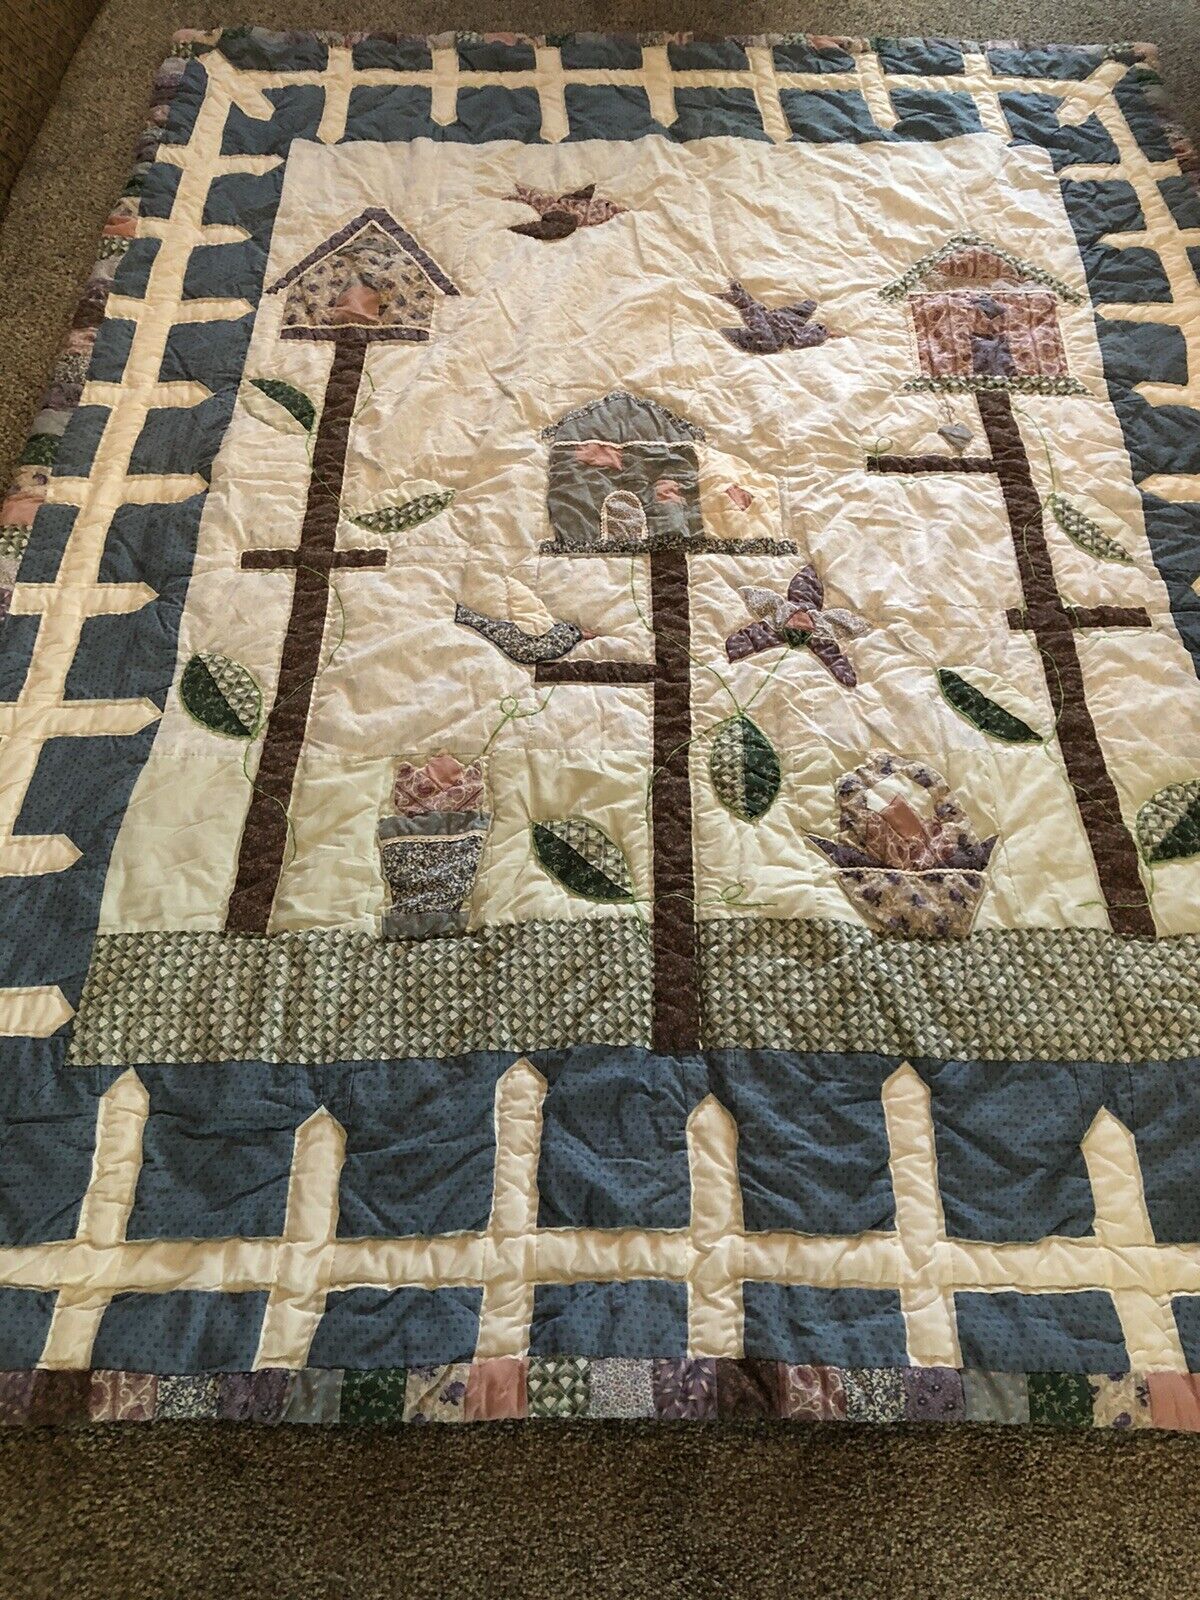 Patchwork Bird Quilt In Multi Colors All Hand Quilted. 80” L X 66” W.